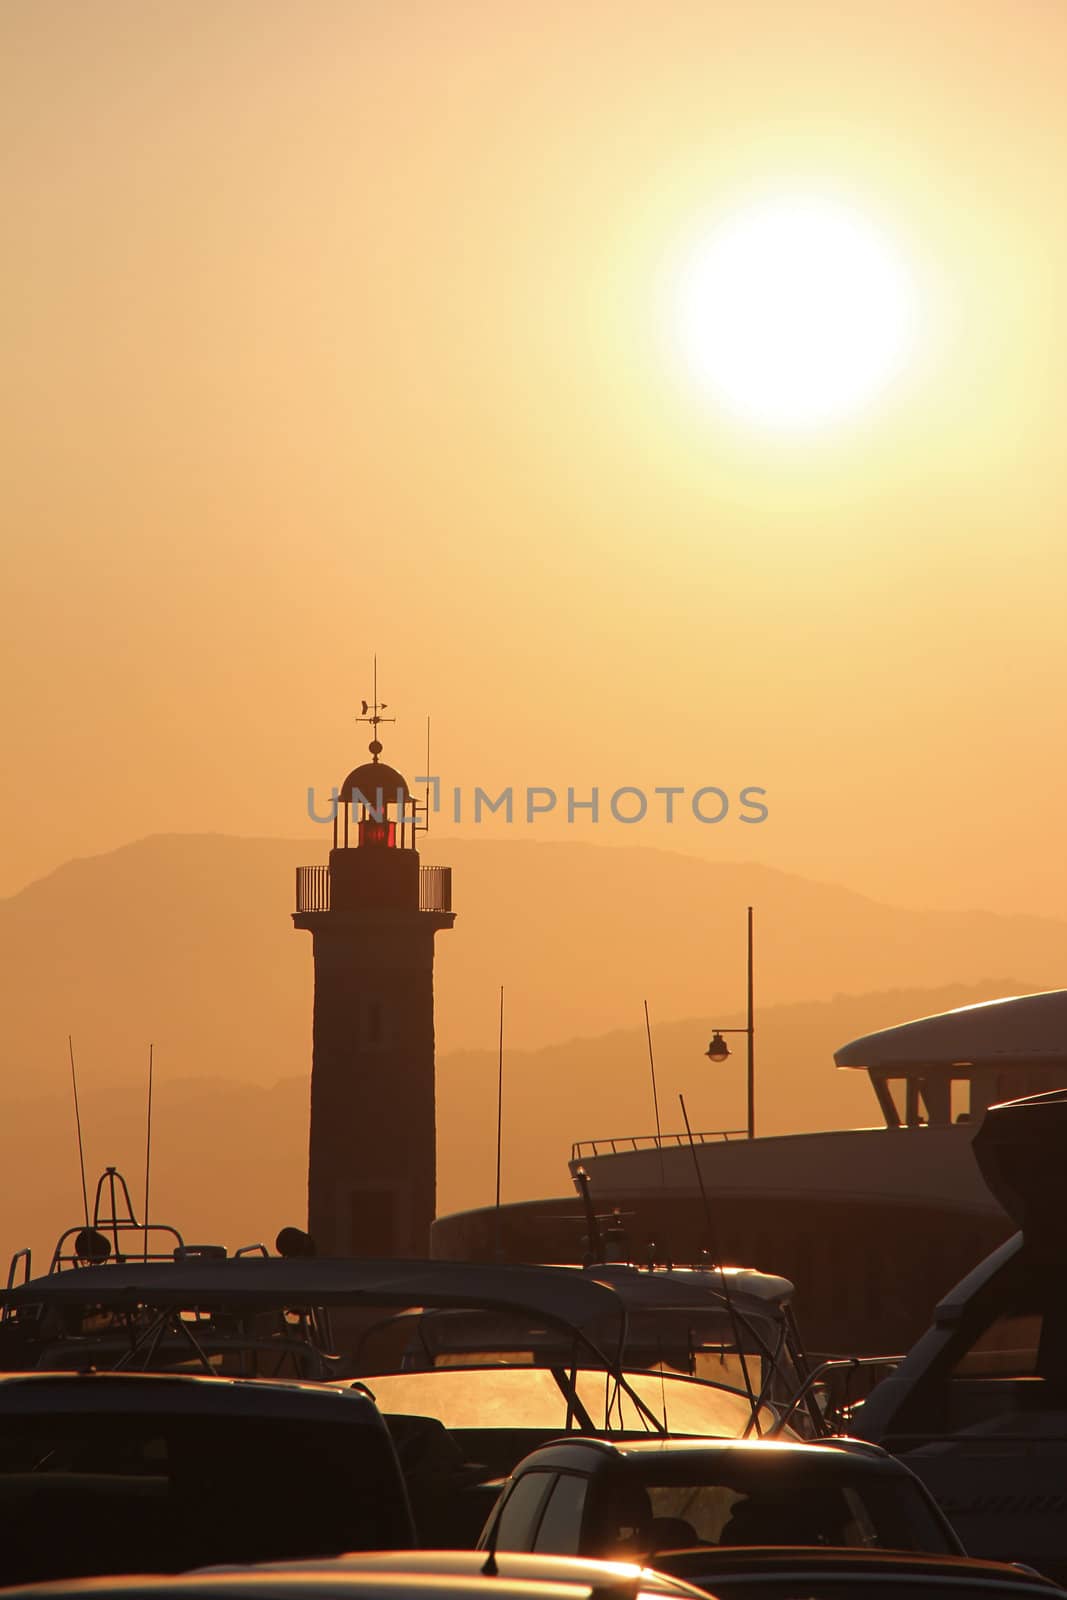 Lighthouse of saint tropez with ships in sunset